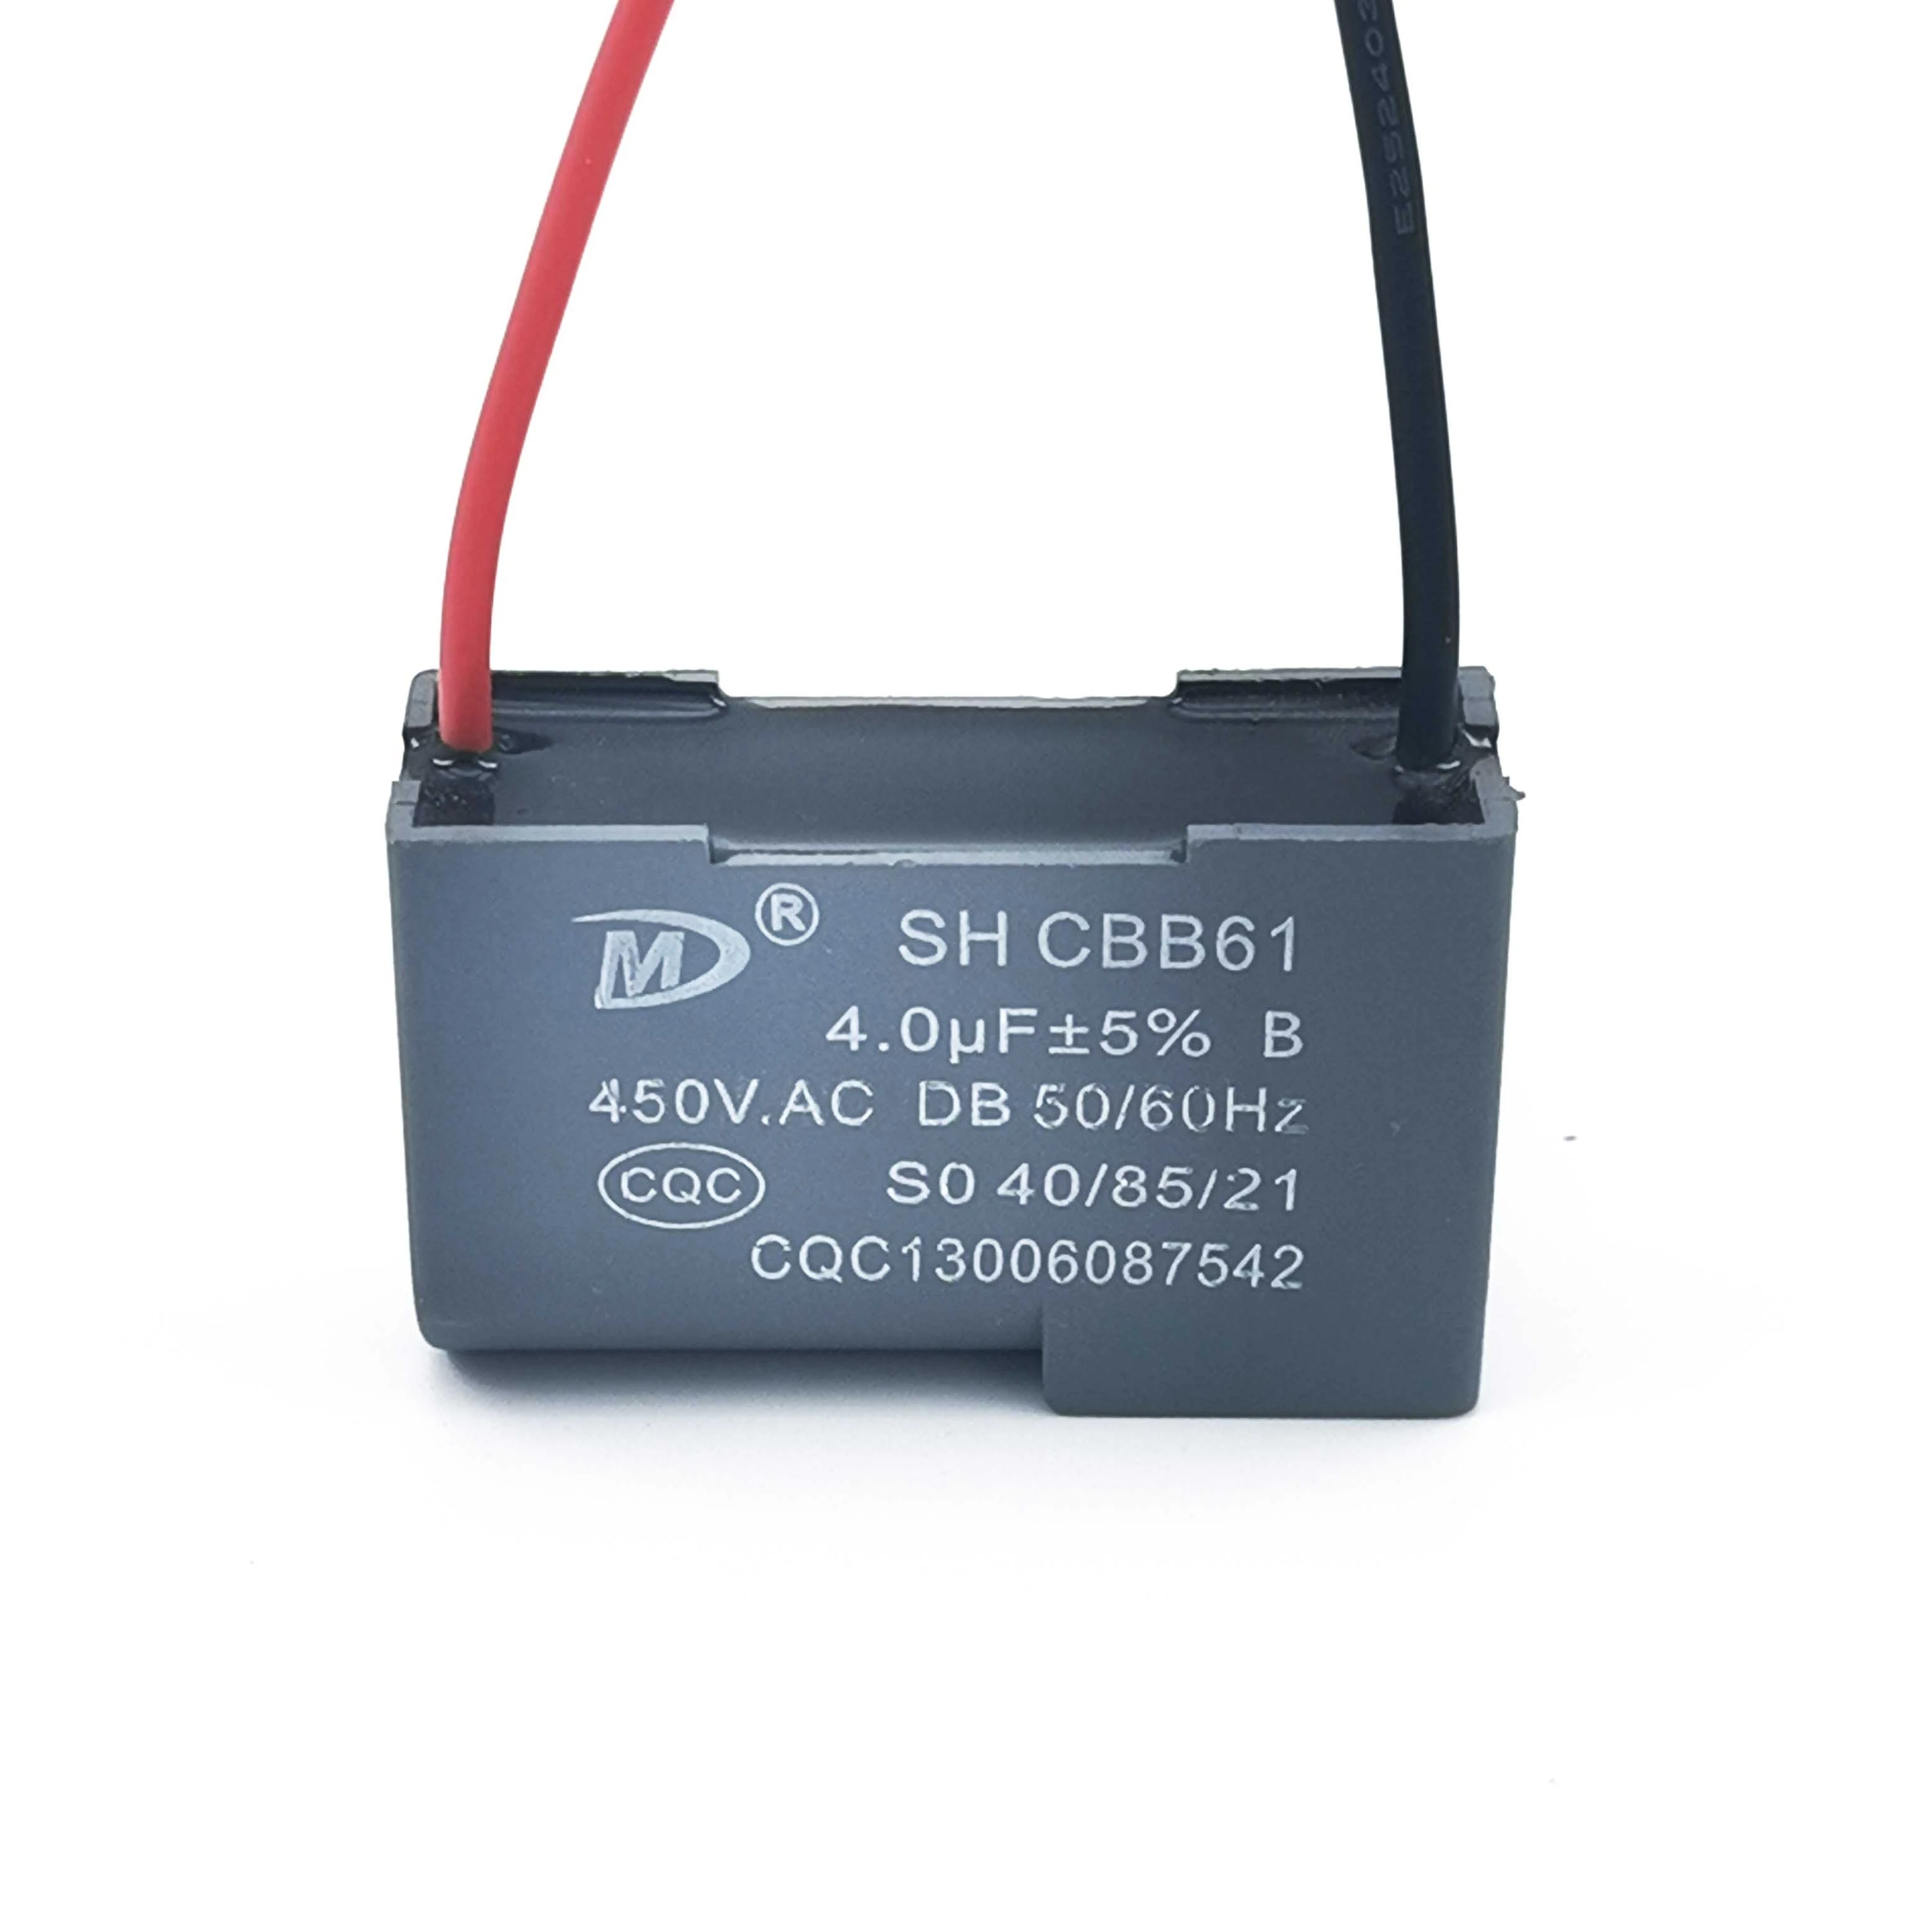 
CBB61 capacitor 450v 3.5uf Fan capacitor with wires 